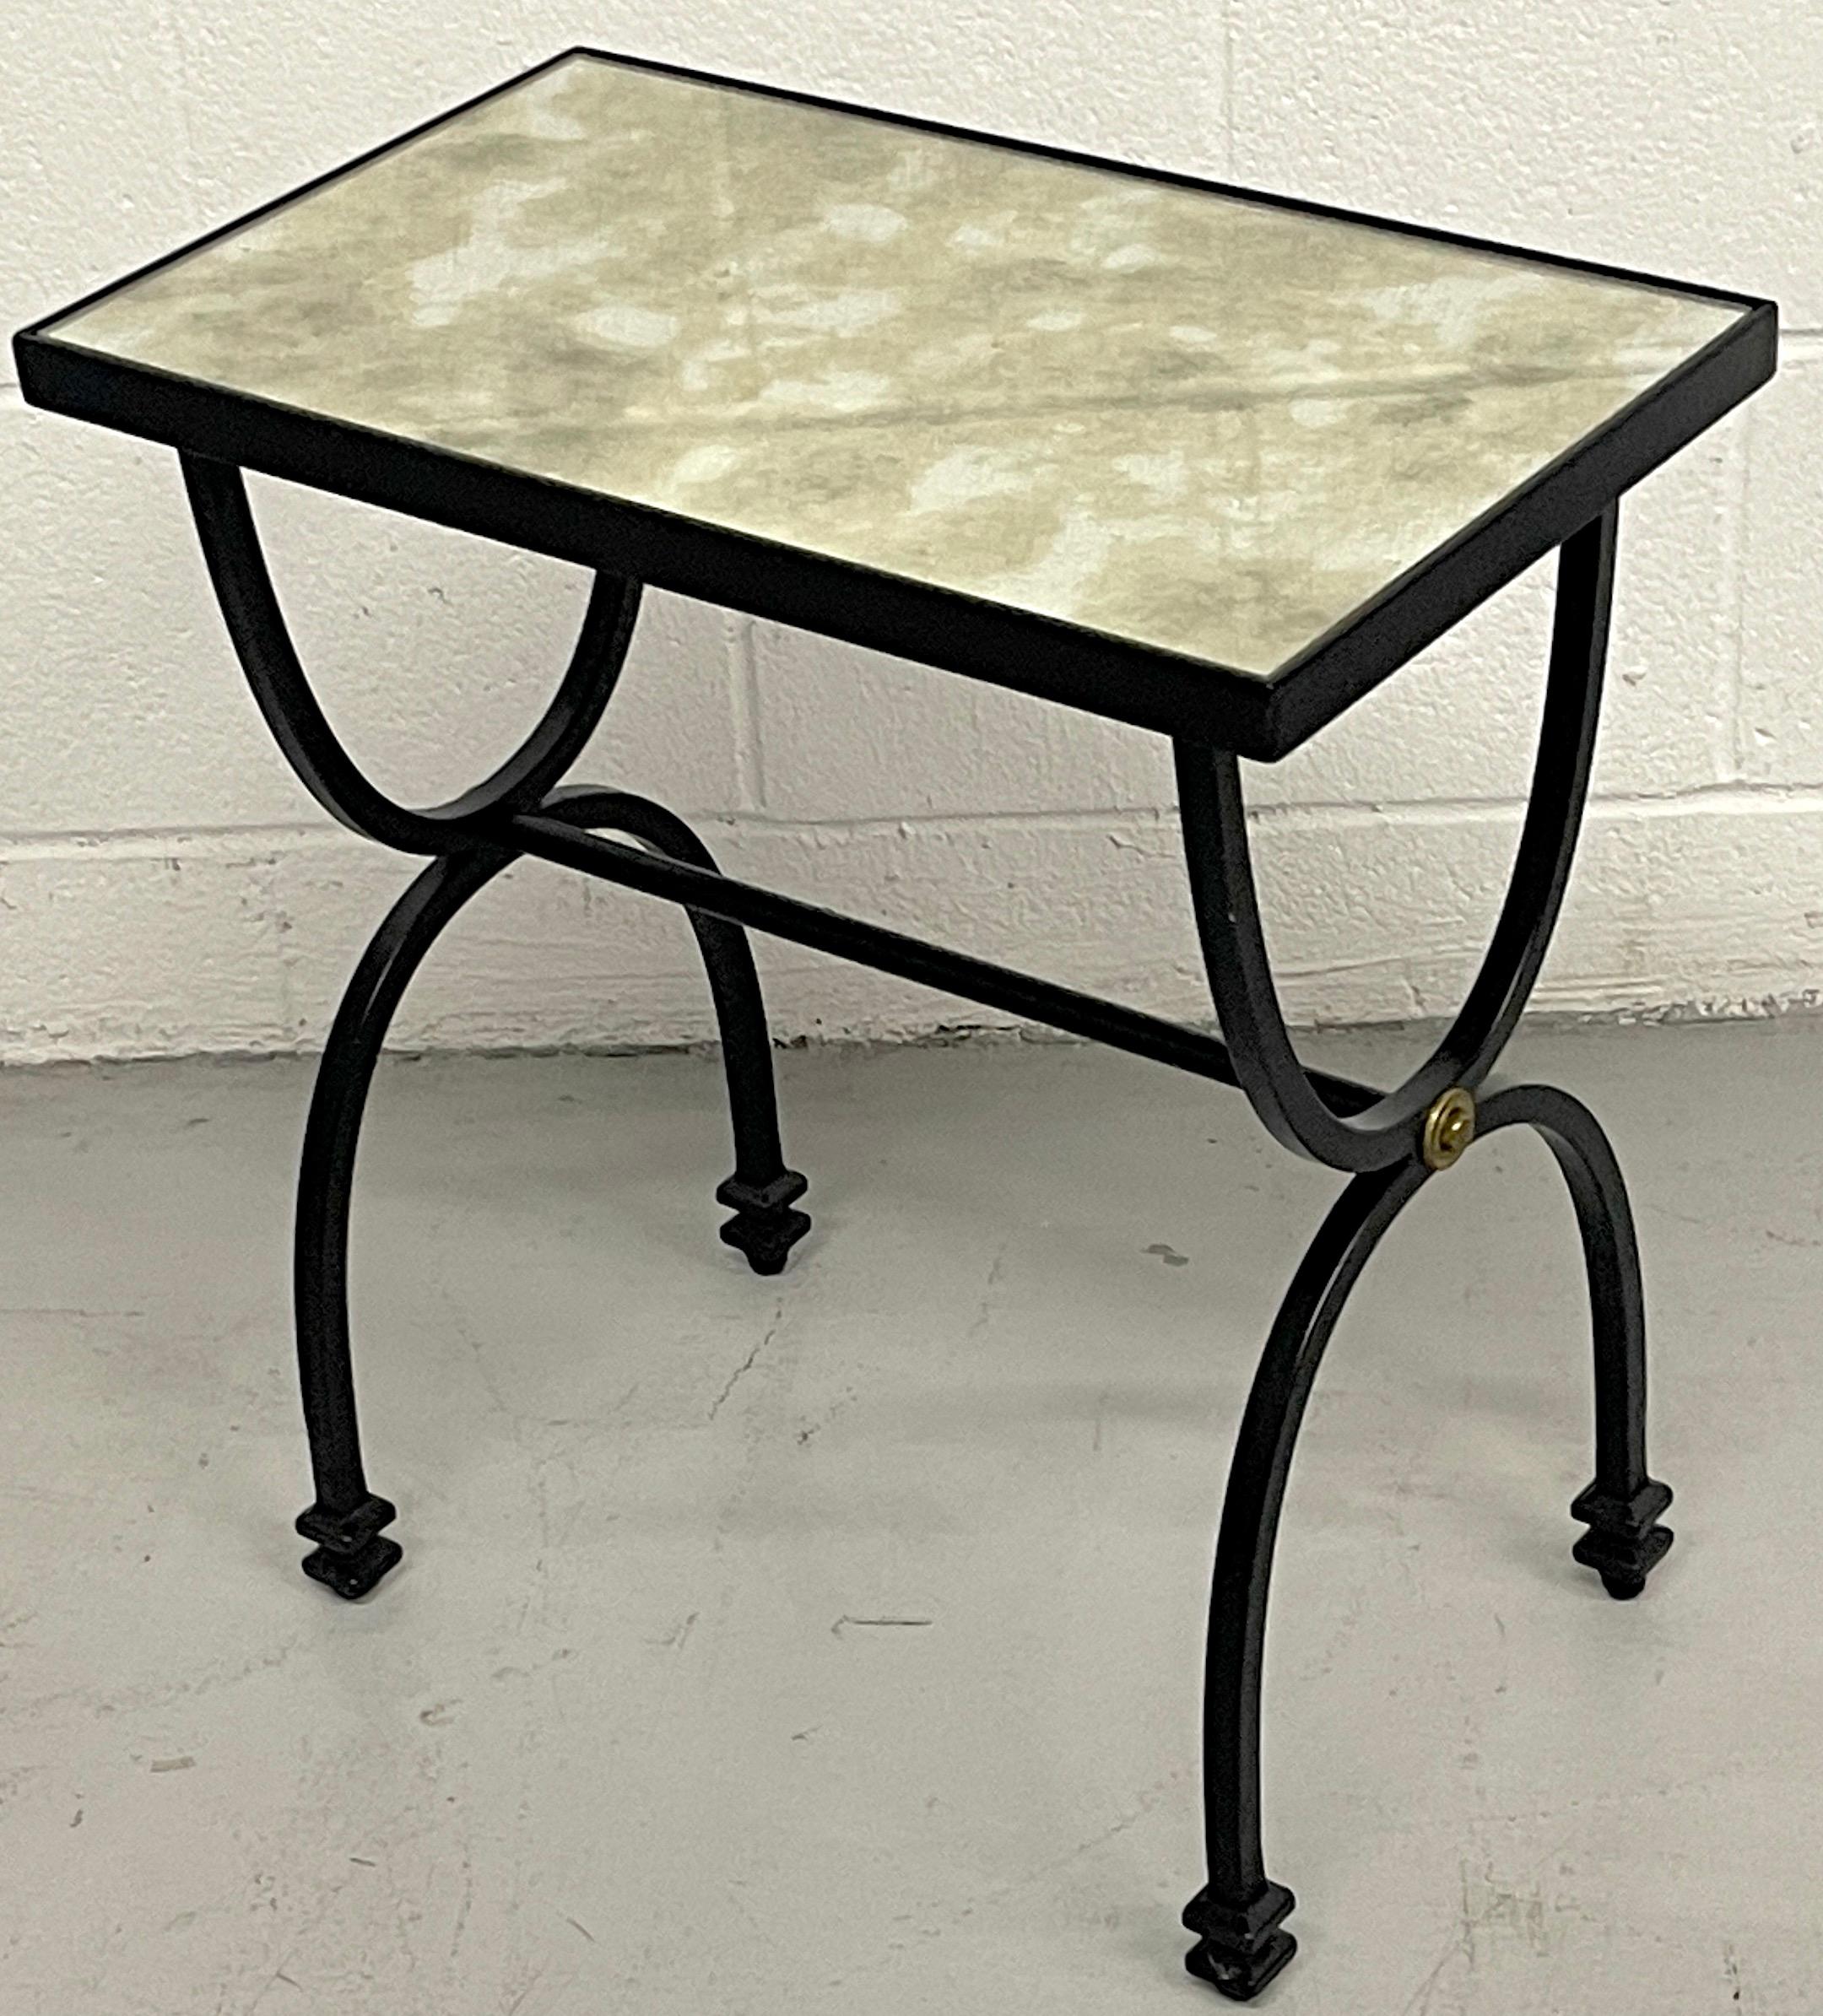 Diminutive French Modern Style Side Table, Style of Maison Jansen In Good Condition For Sale In West Palm Beach, FL